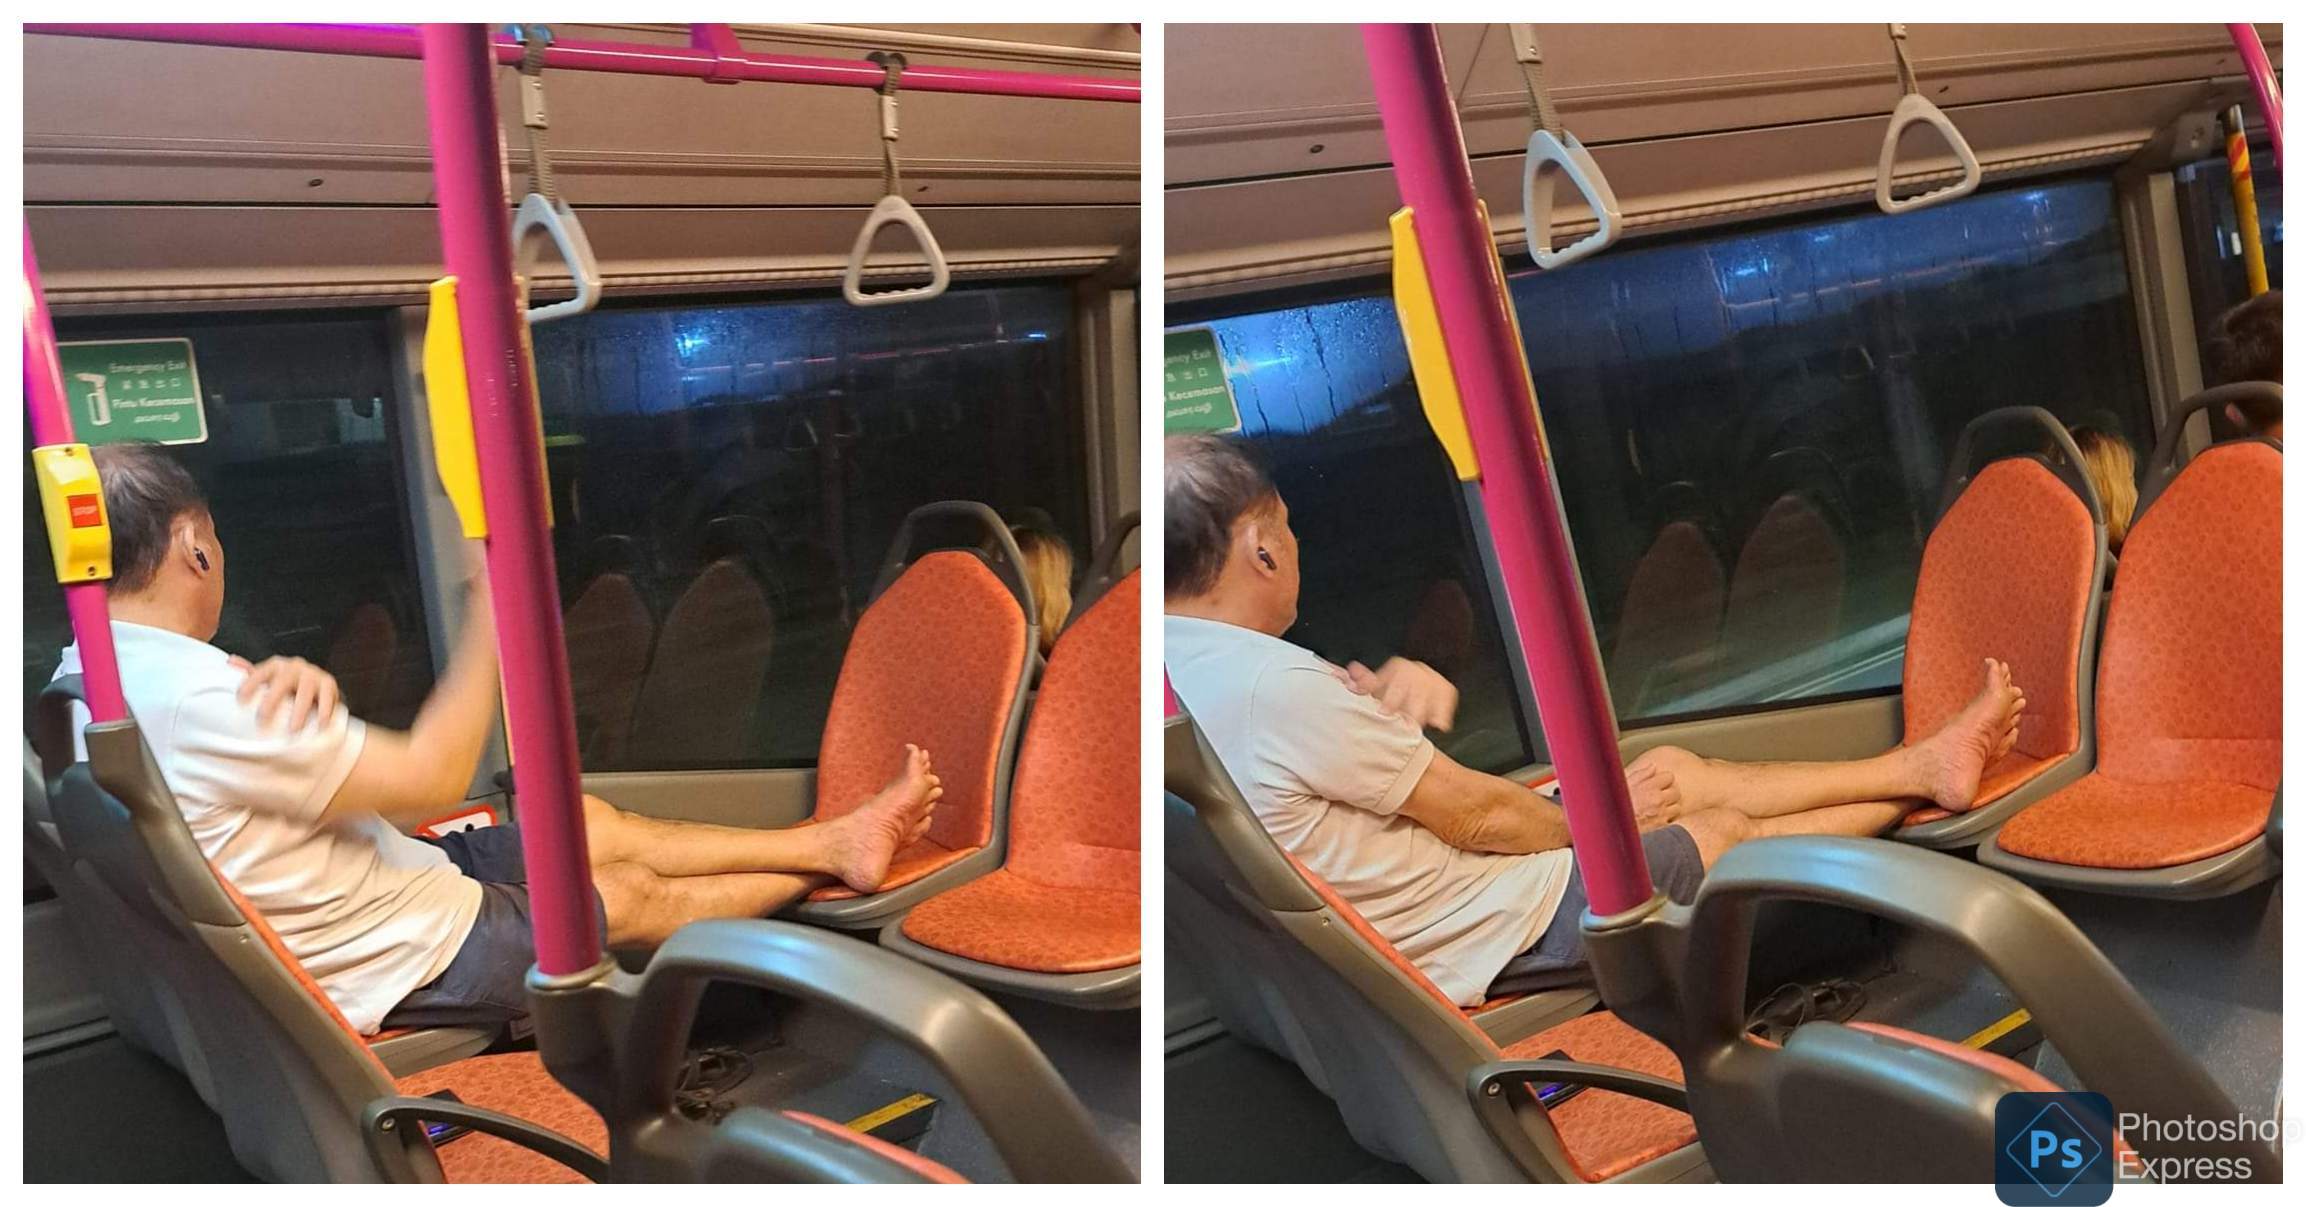 MAN SPREADS HIS “AROMATIC” FOOT BACTERIA ON BUS SEATS